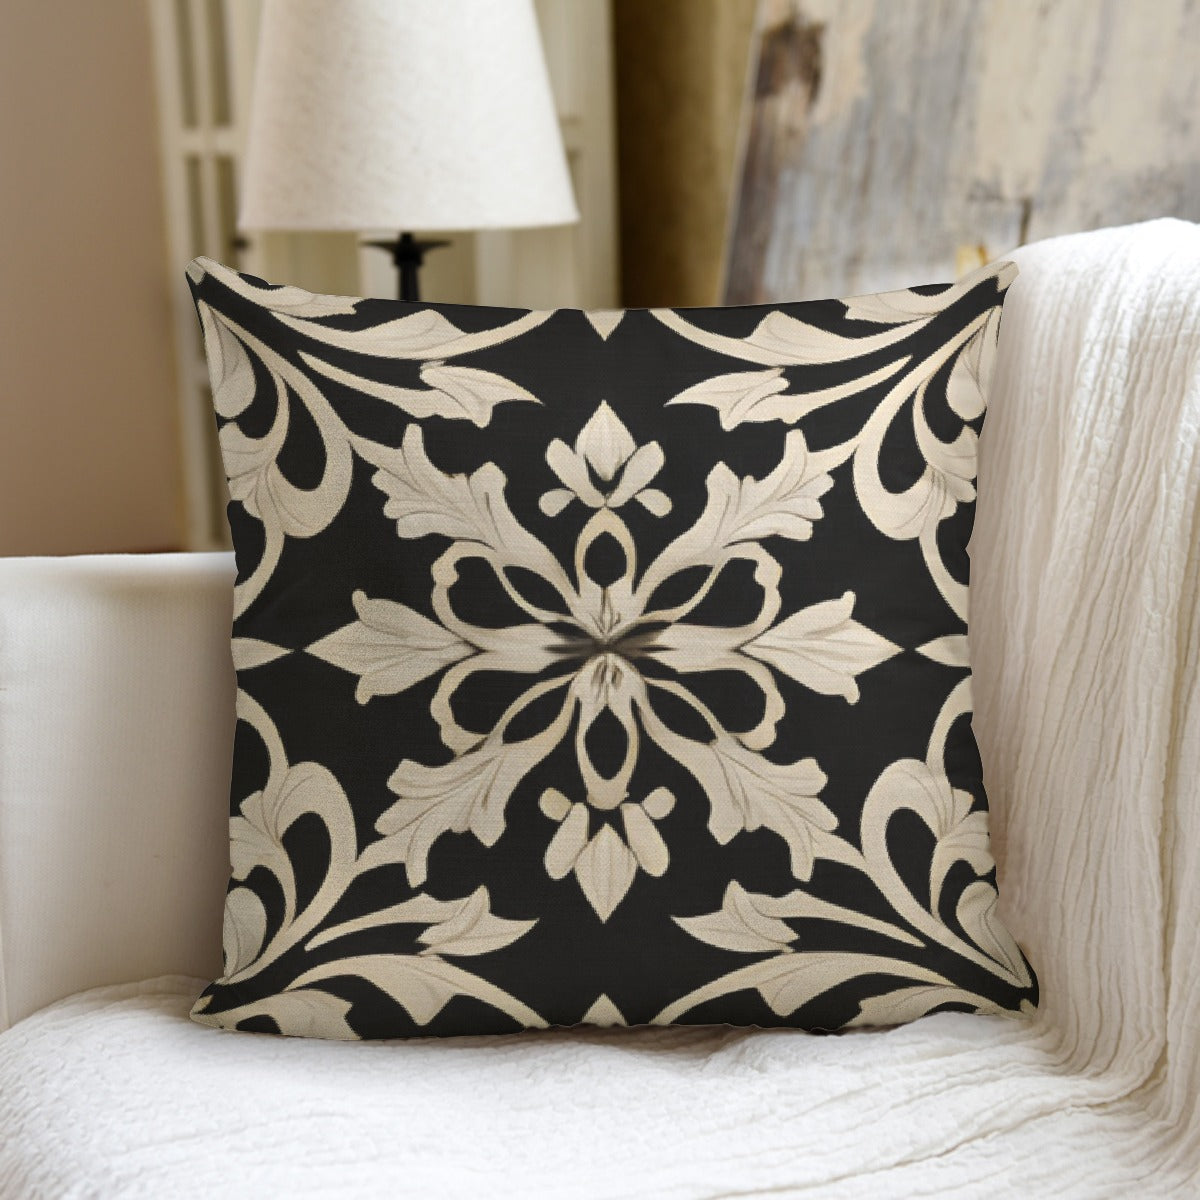 AC BAROQUE  pillow with pillow Inserts